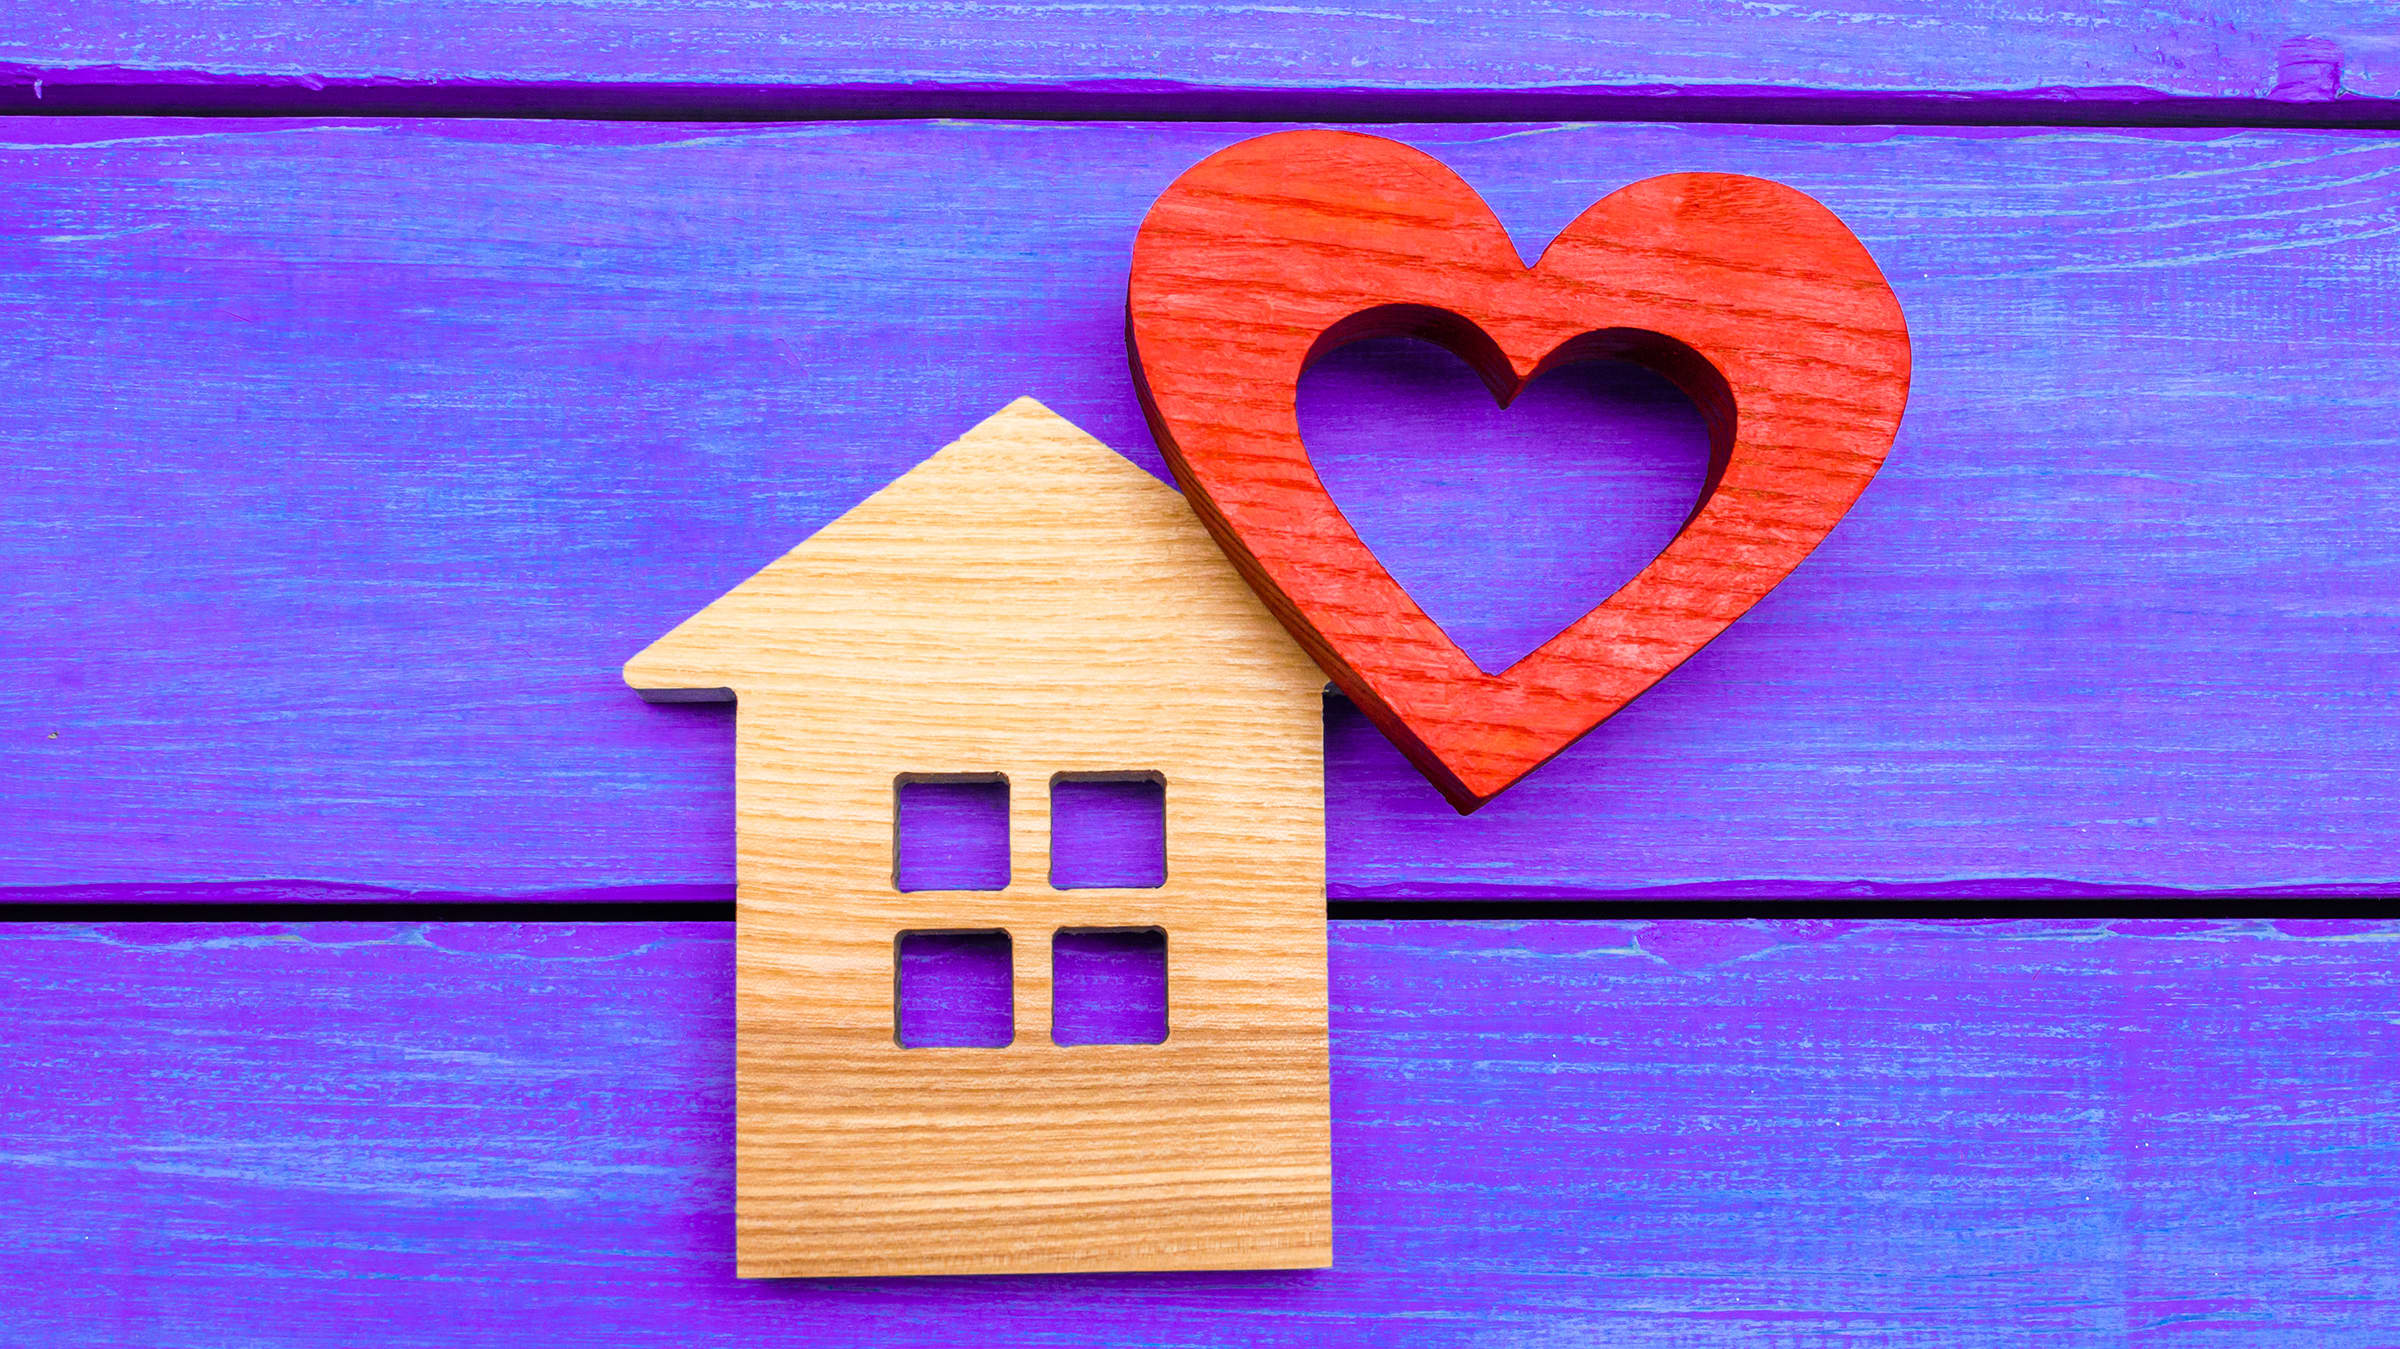 Wooden home cut-out with cut-out wooden heart, symbolizing Yale's home-based care programs